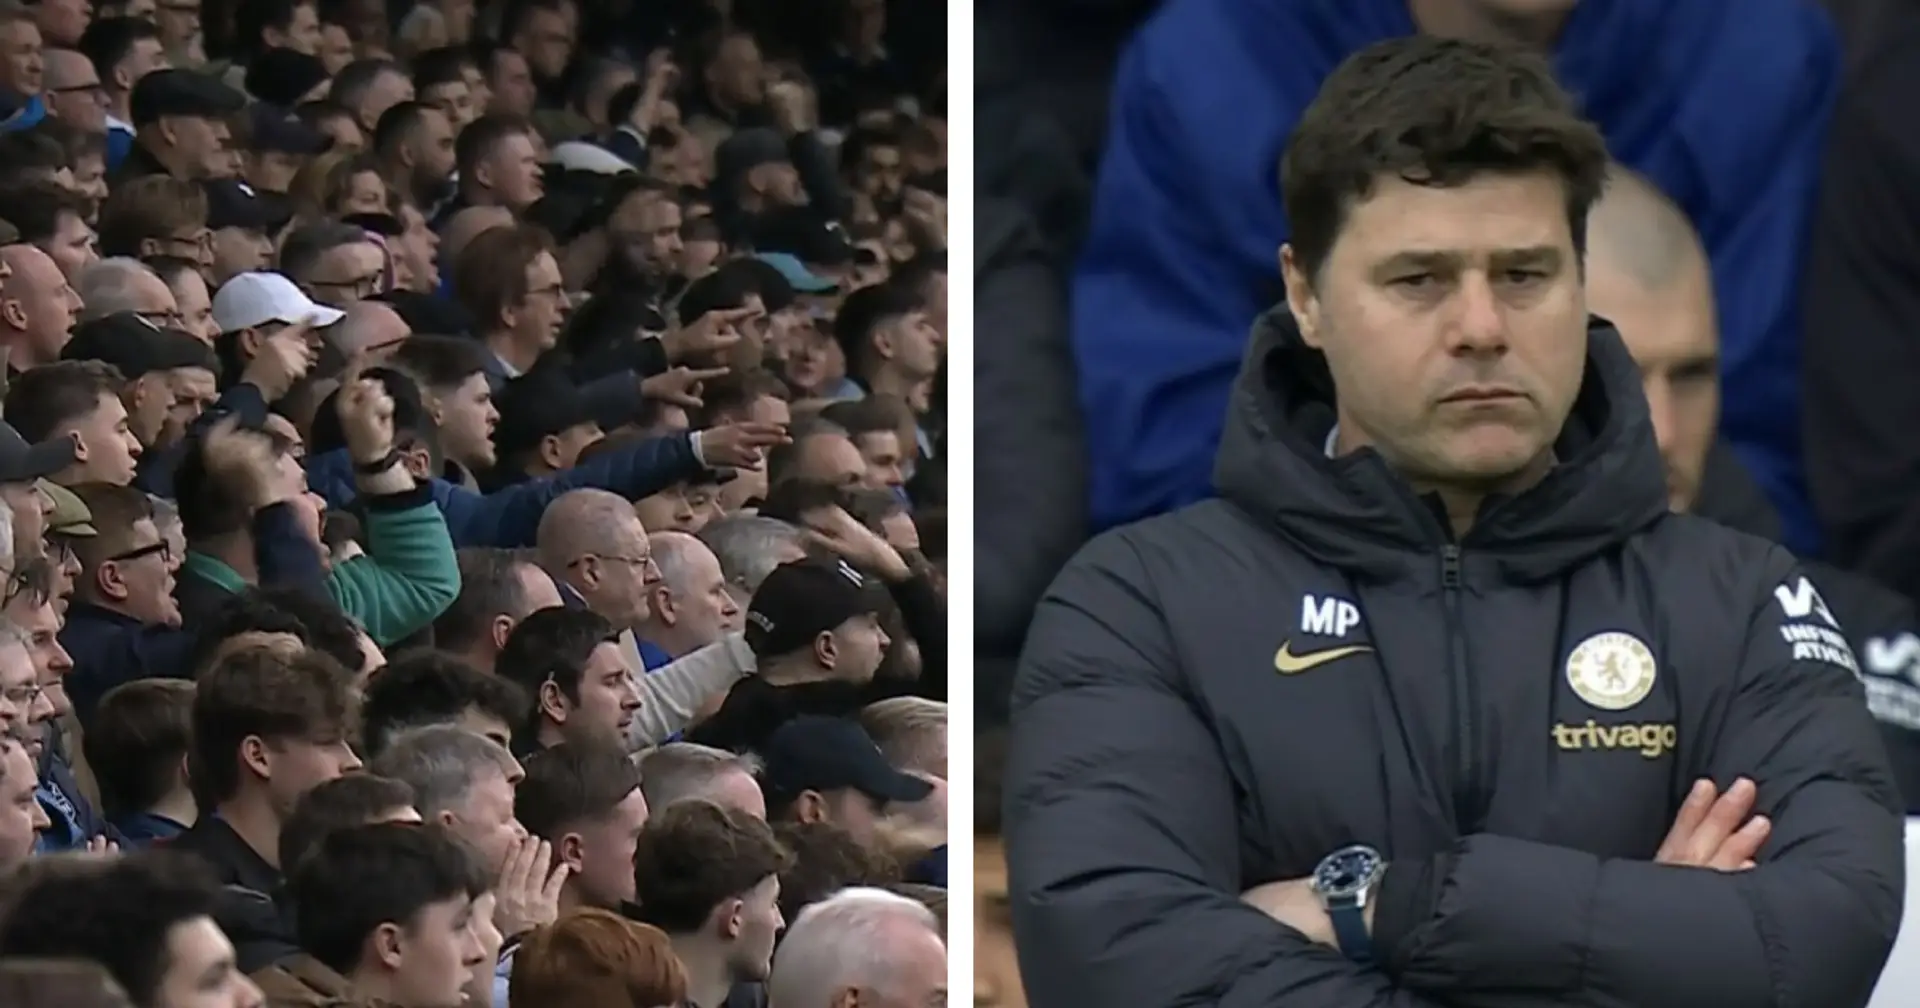 Chelsea fans sing to Pochettino 'You don't know what you're doing' after one decision